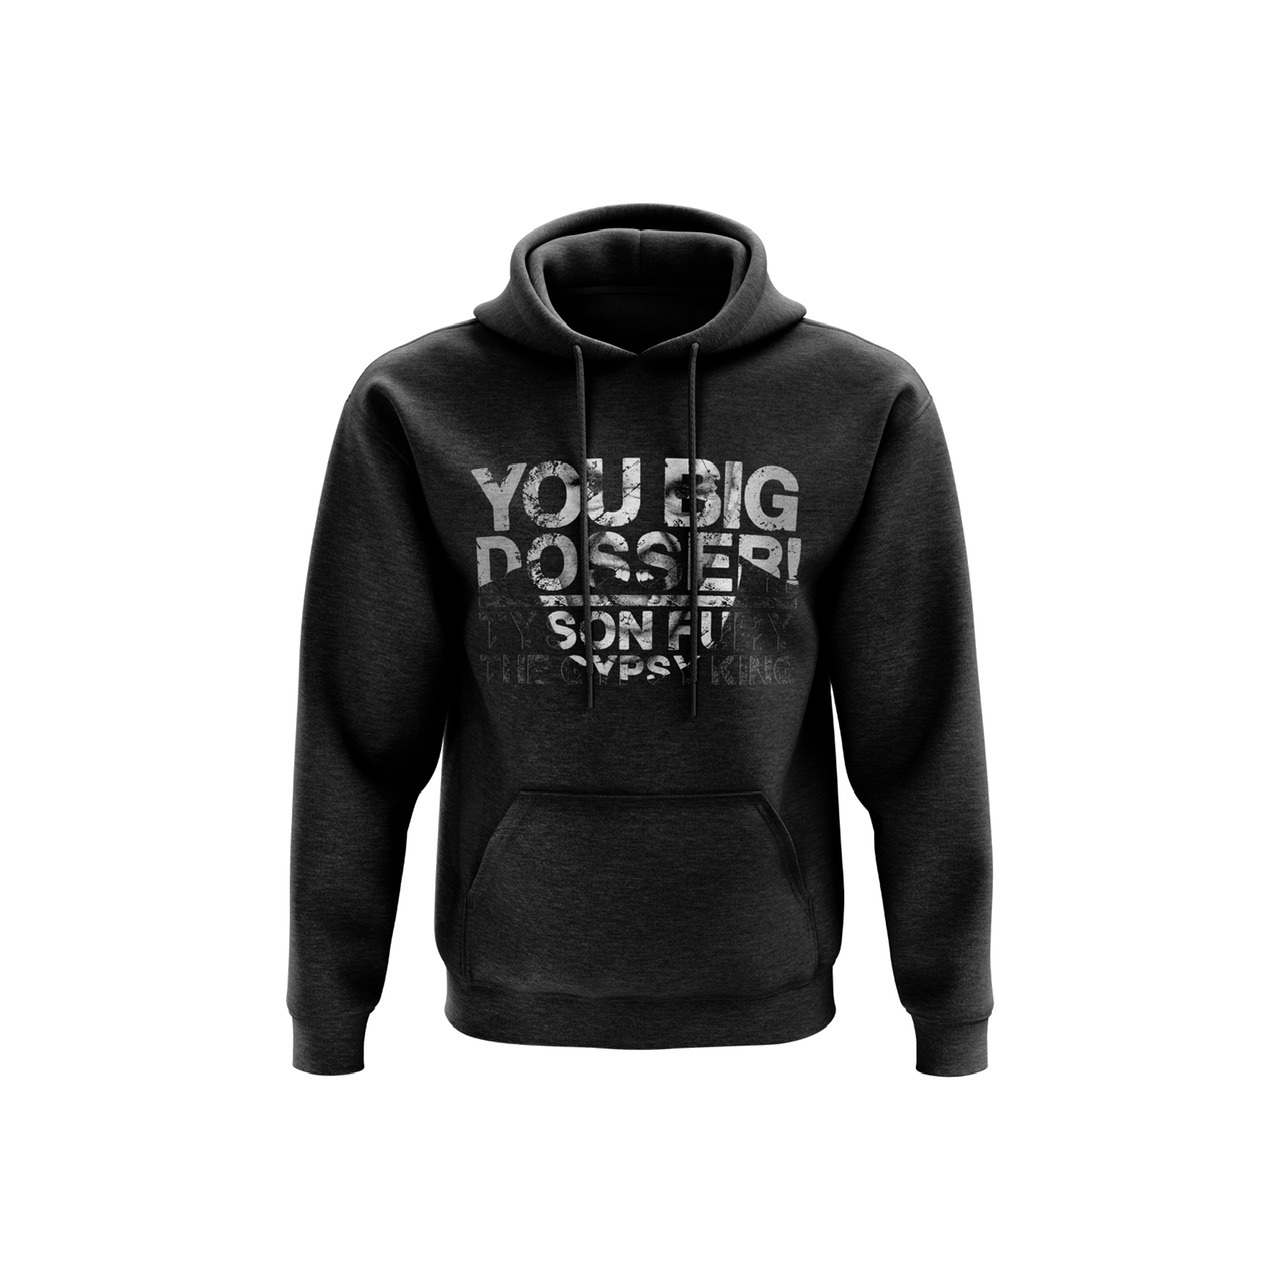 TWO TONE FACE BIG DOSSER - BLACK HOODIE - Tyson Fury Official Merchandise